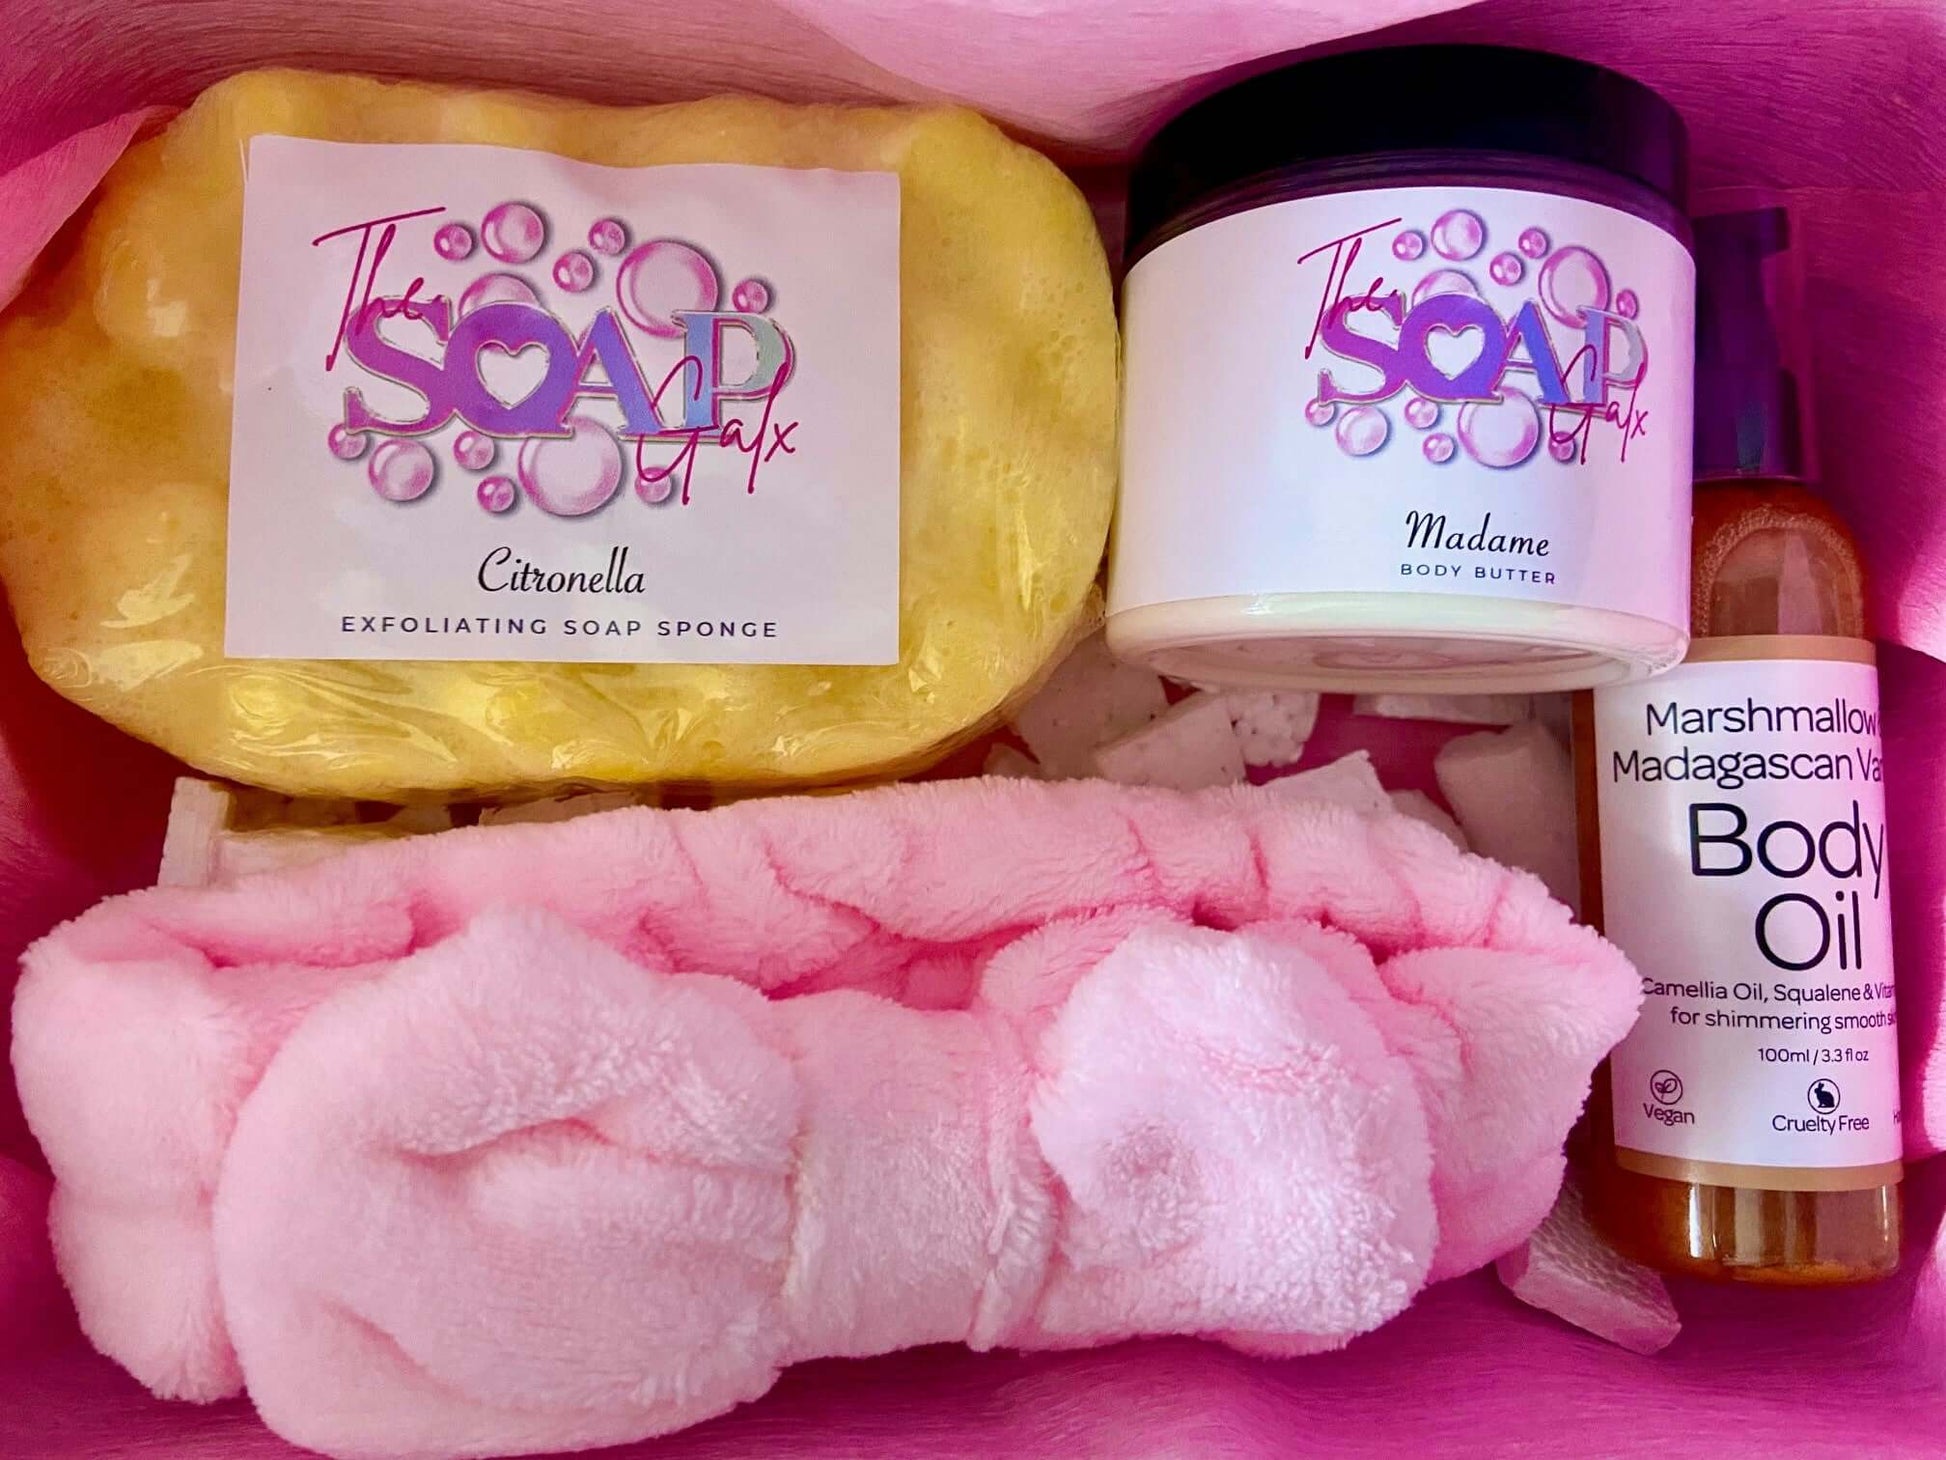 A pink Mystery Box with soap, lotion, and other skincare items from The Soap Gal x.